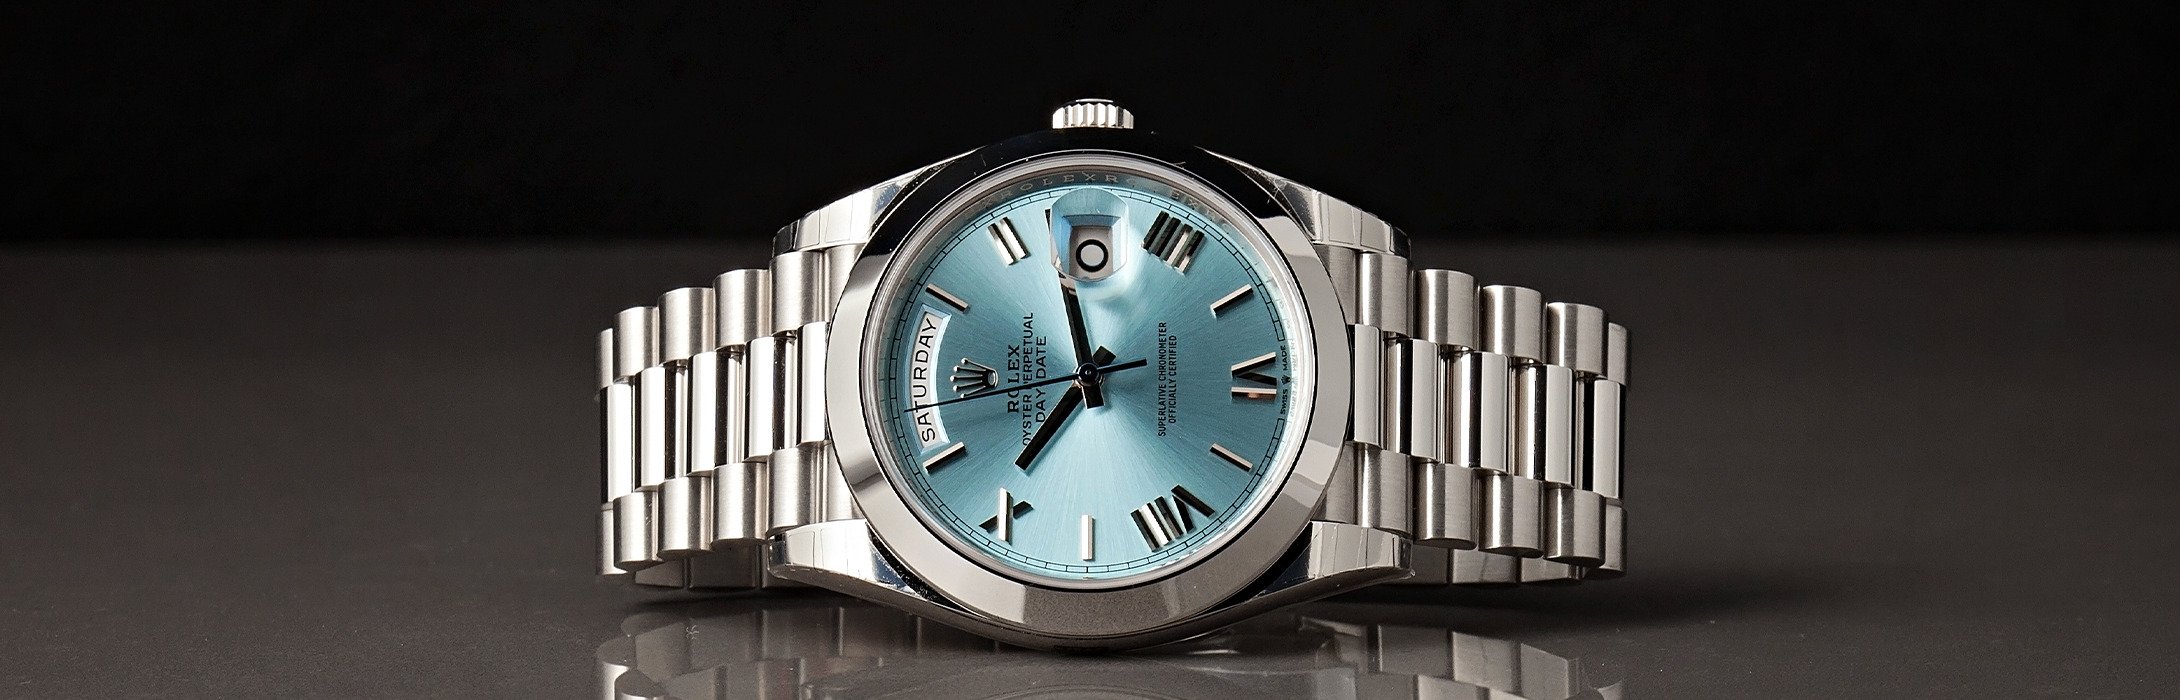 Rolex Platinum day date buying guide